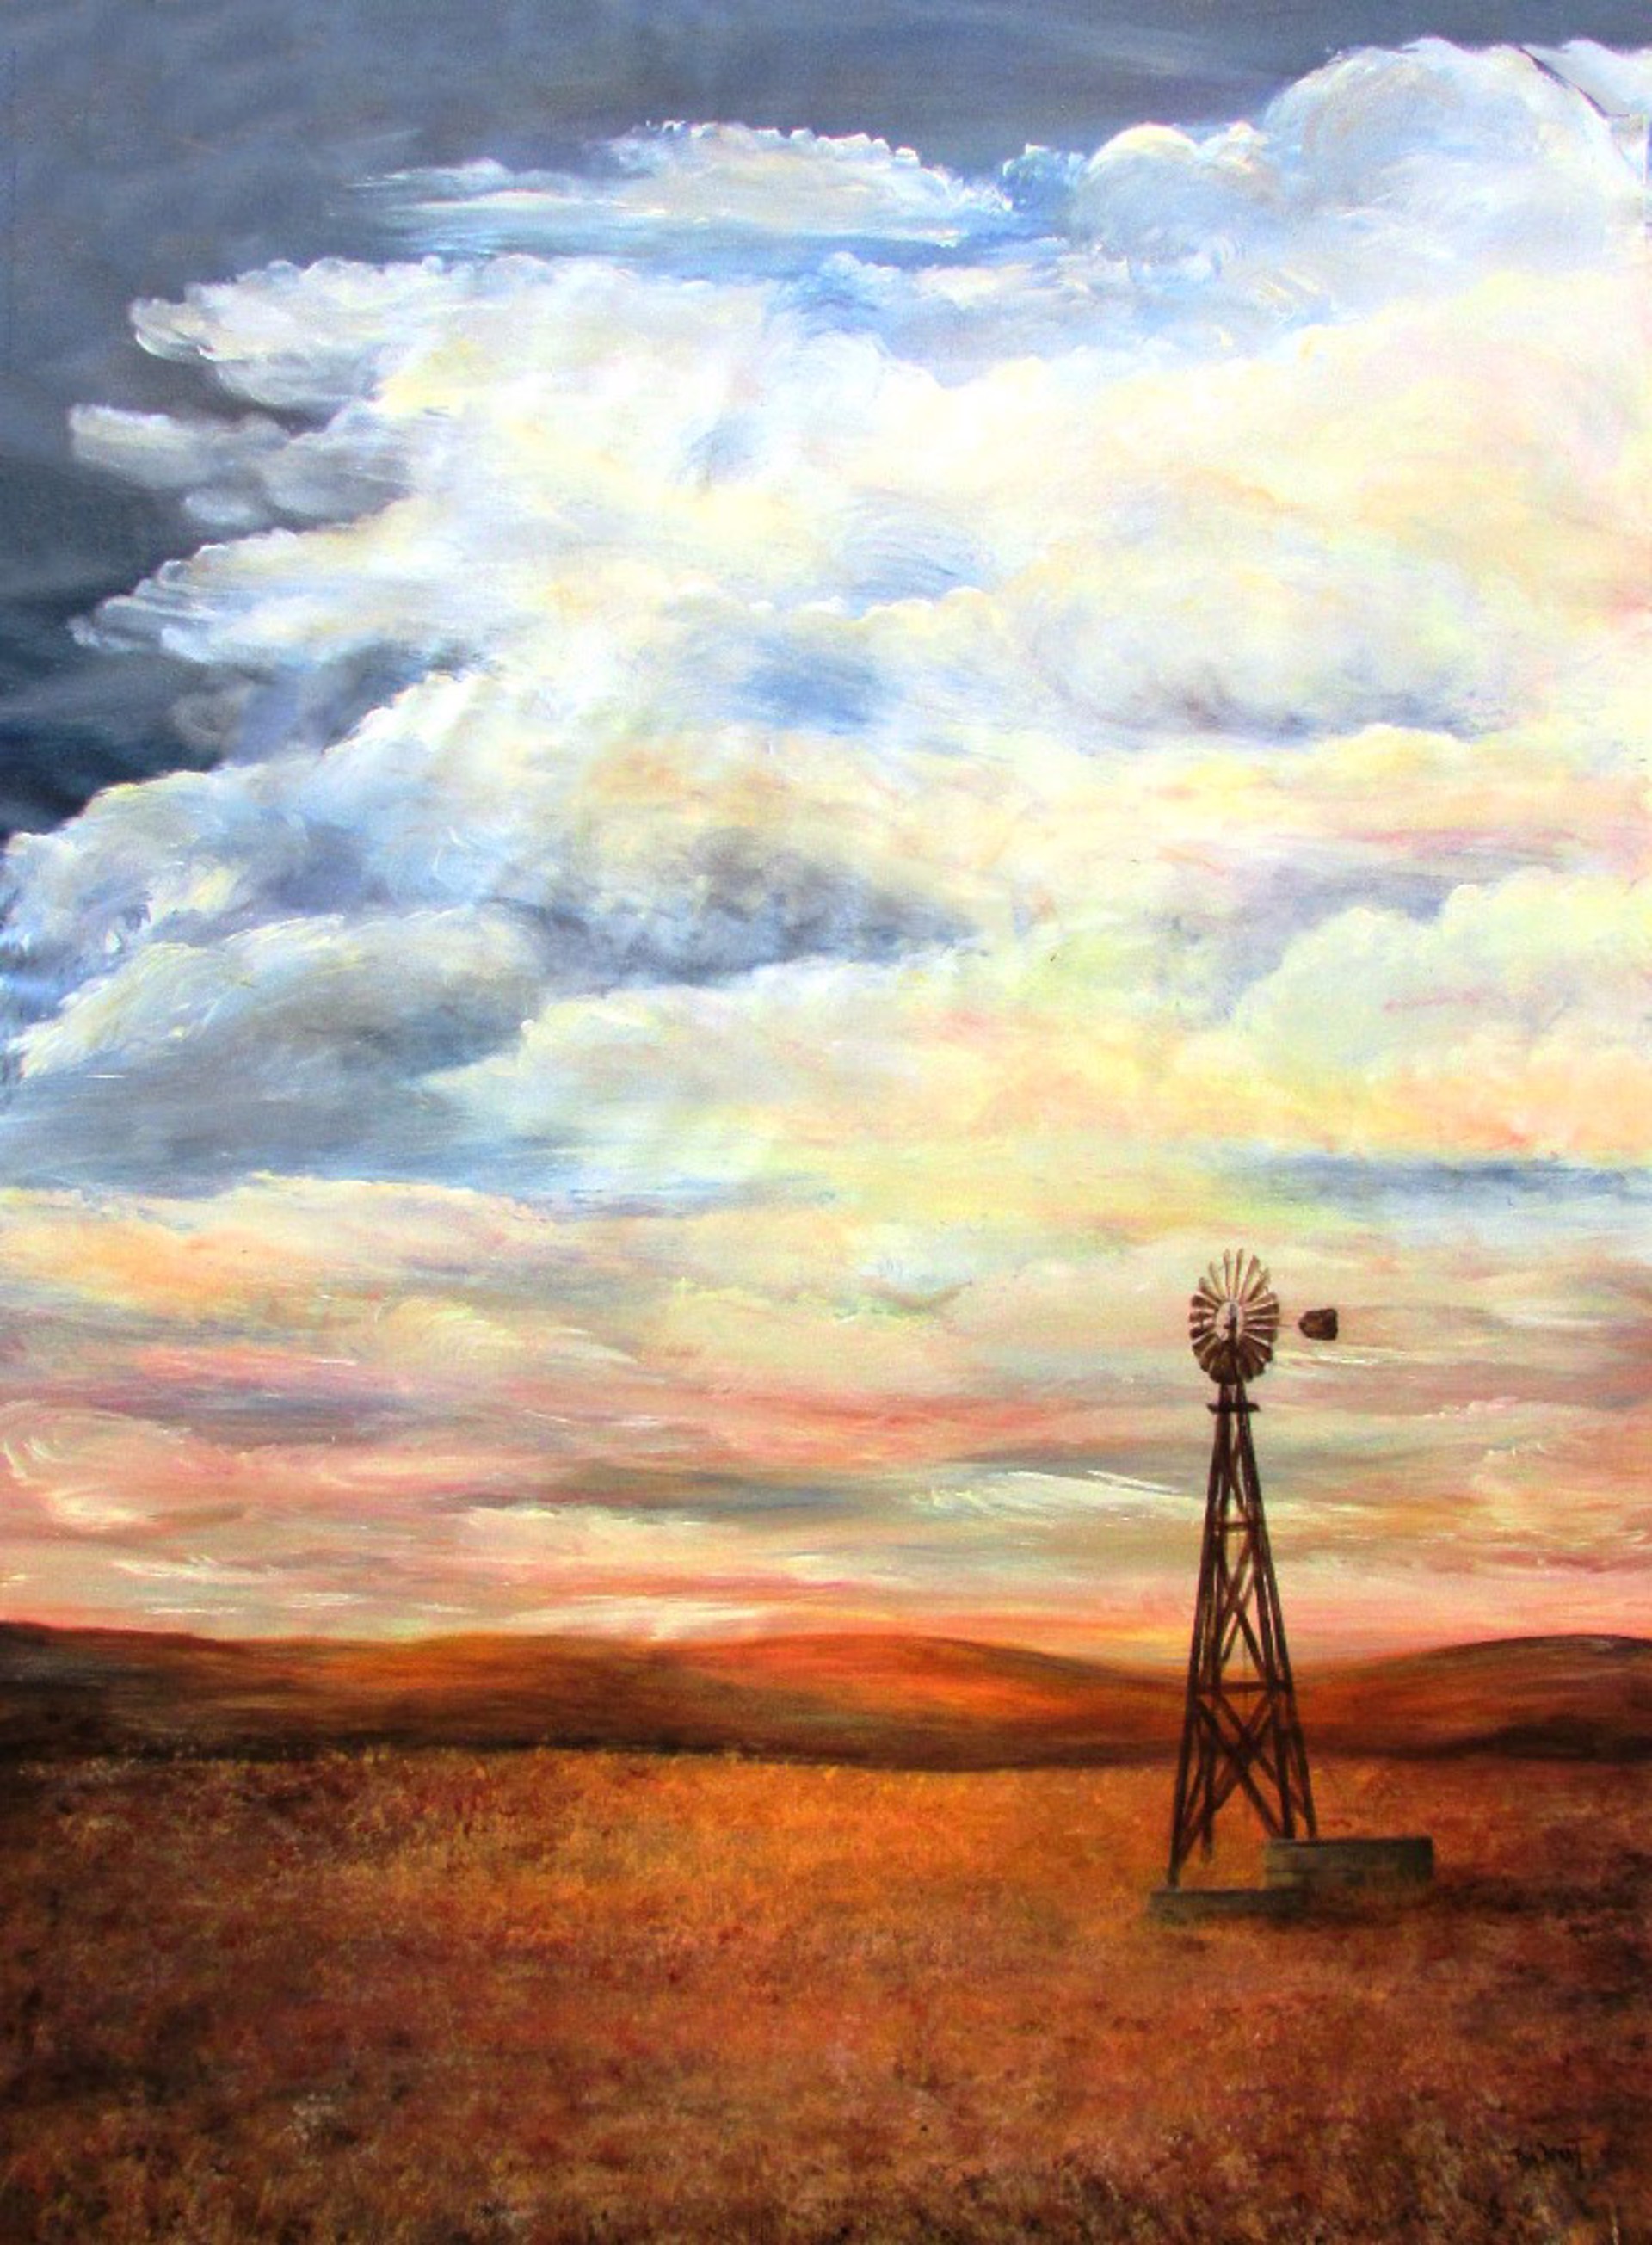 Windmill in the Flint Hills by Pam Brant